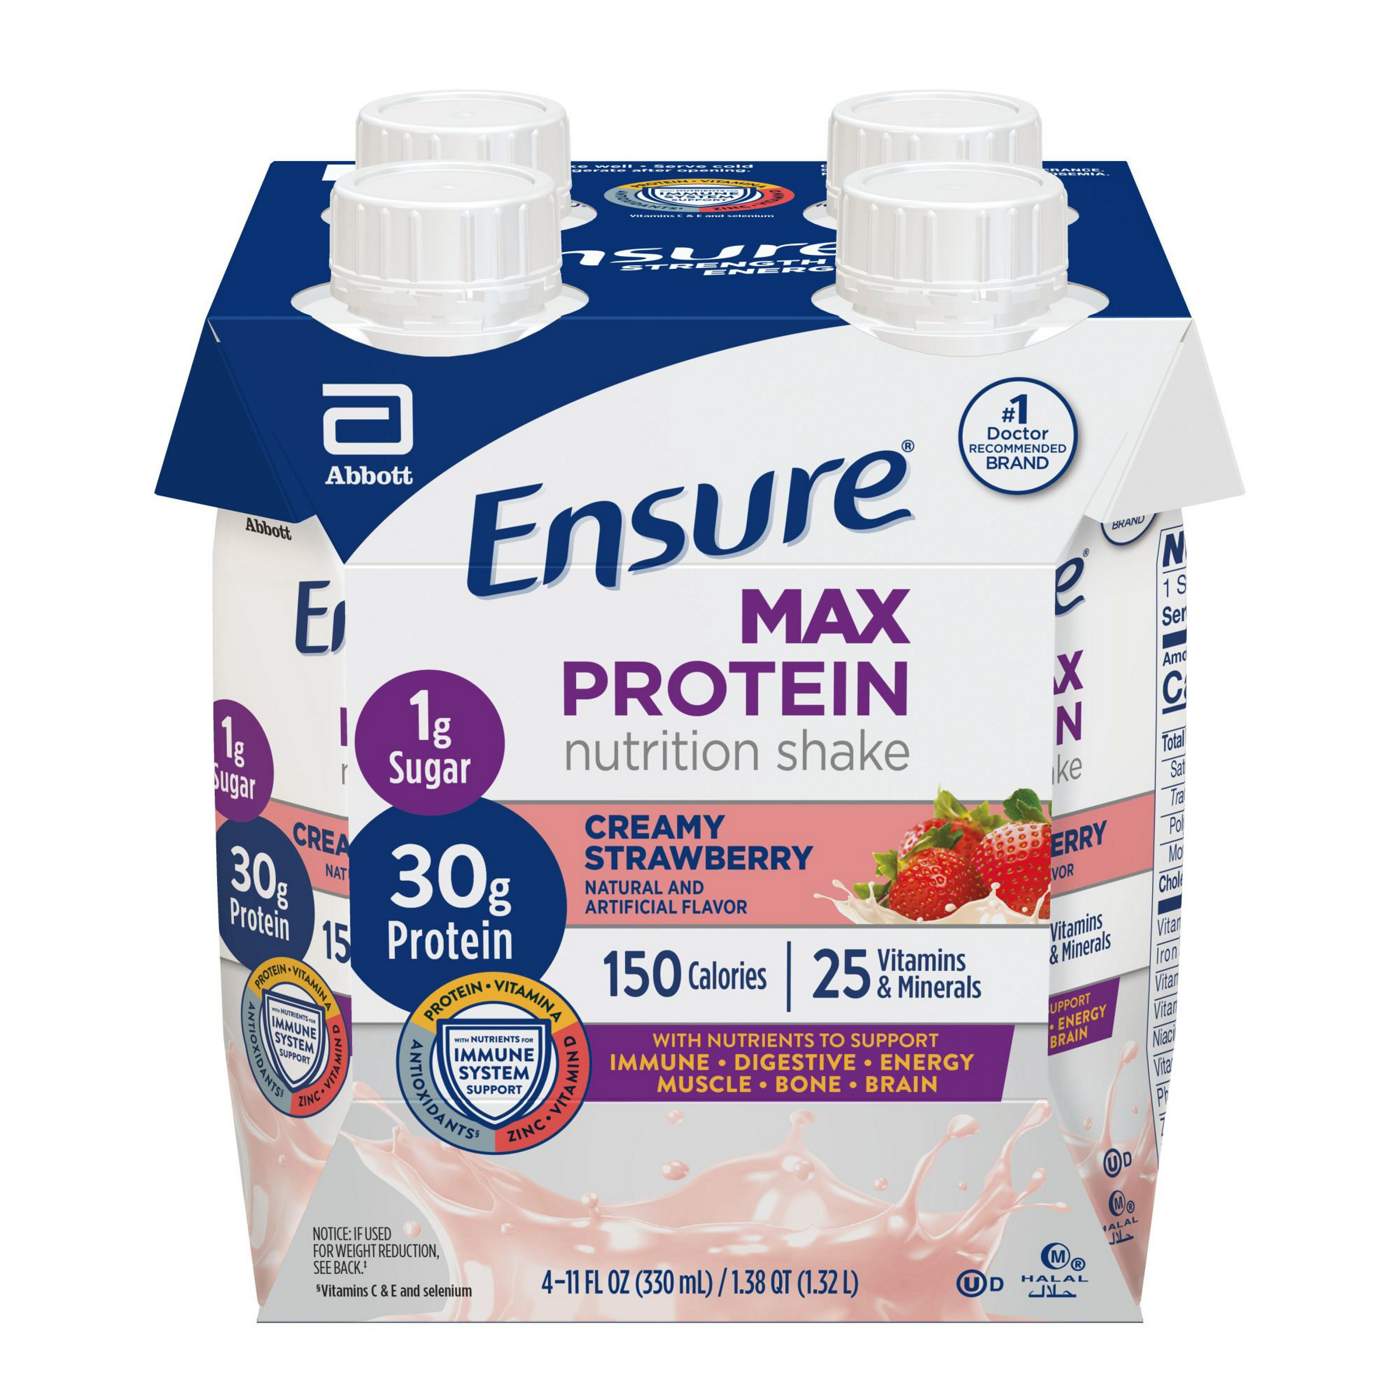 Ensure Max Protein Nutrition Shake Creamy Strawberry Ready to Drink 11 fl oz Bottles; image 1 of 5